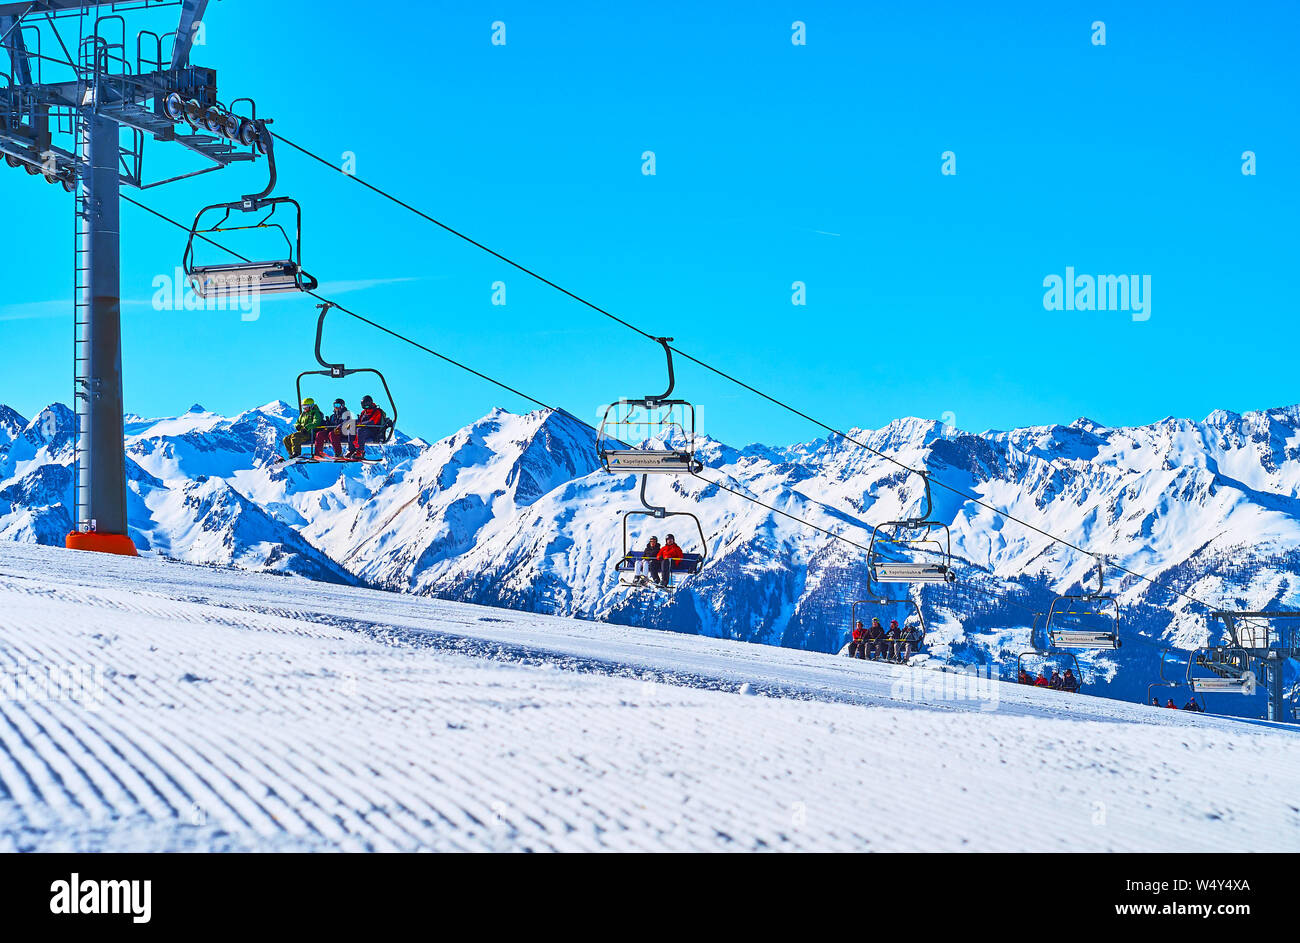 ZELL AM SEE, AUSTRIA - FEBRUARY 28, 2019: Fast running cabins of Kapellenbahn chairlift on the top of snowbound Schmittenhohe mount, covered with nume Stock Photo